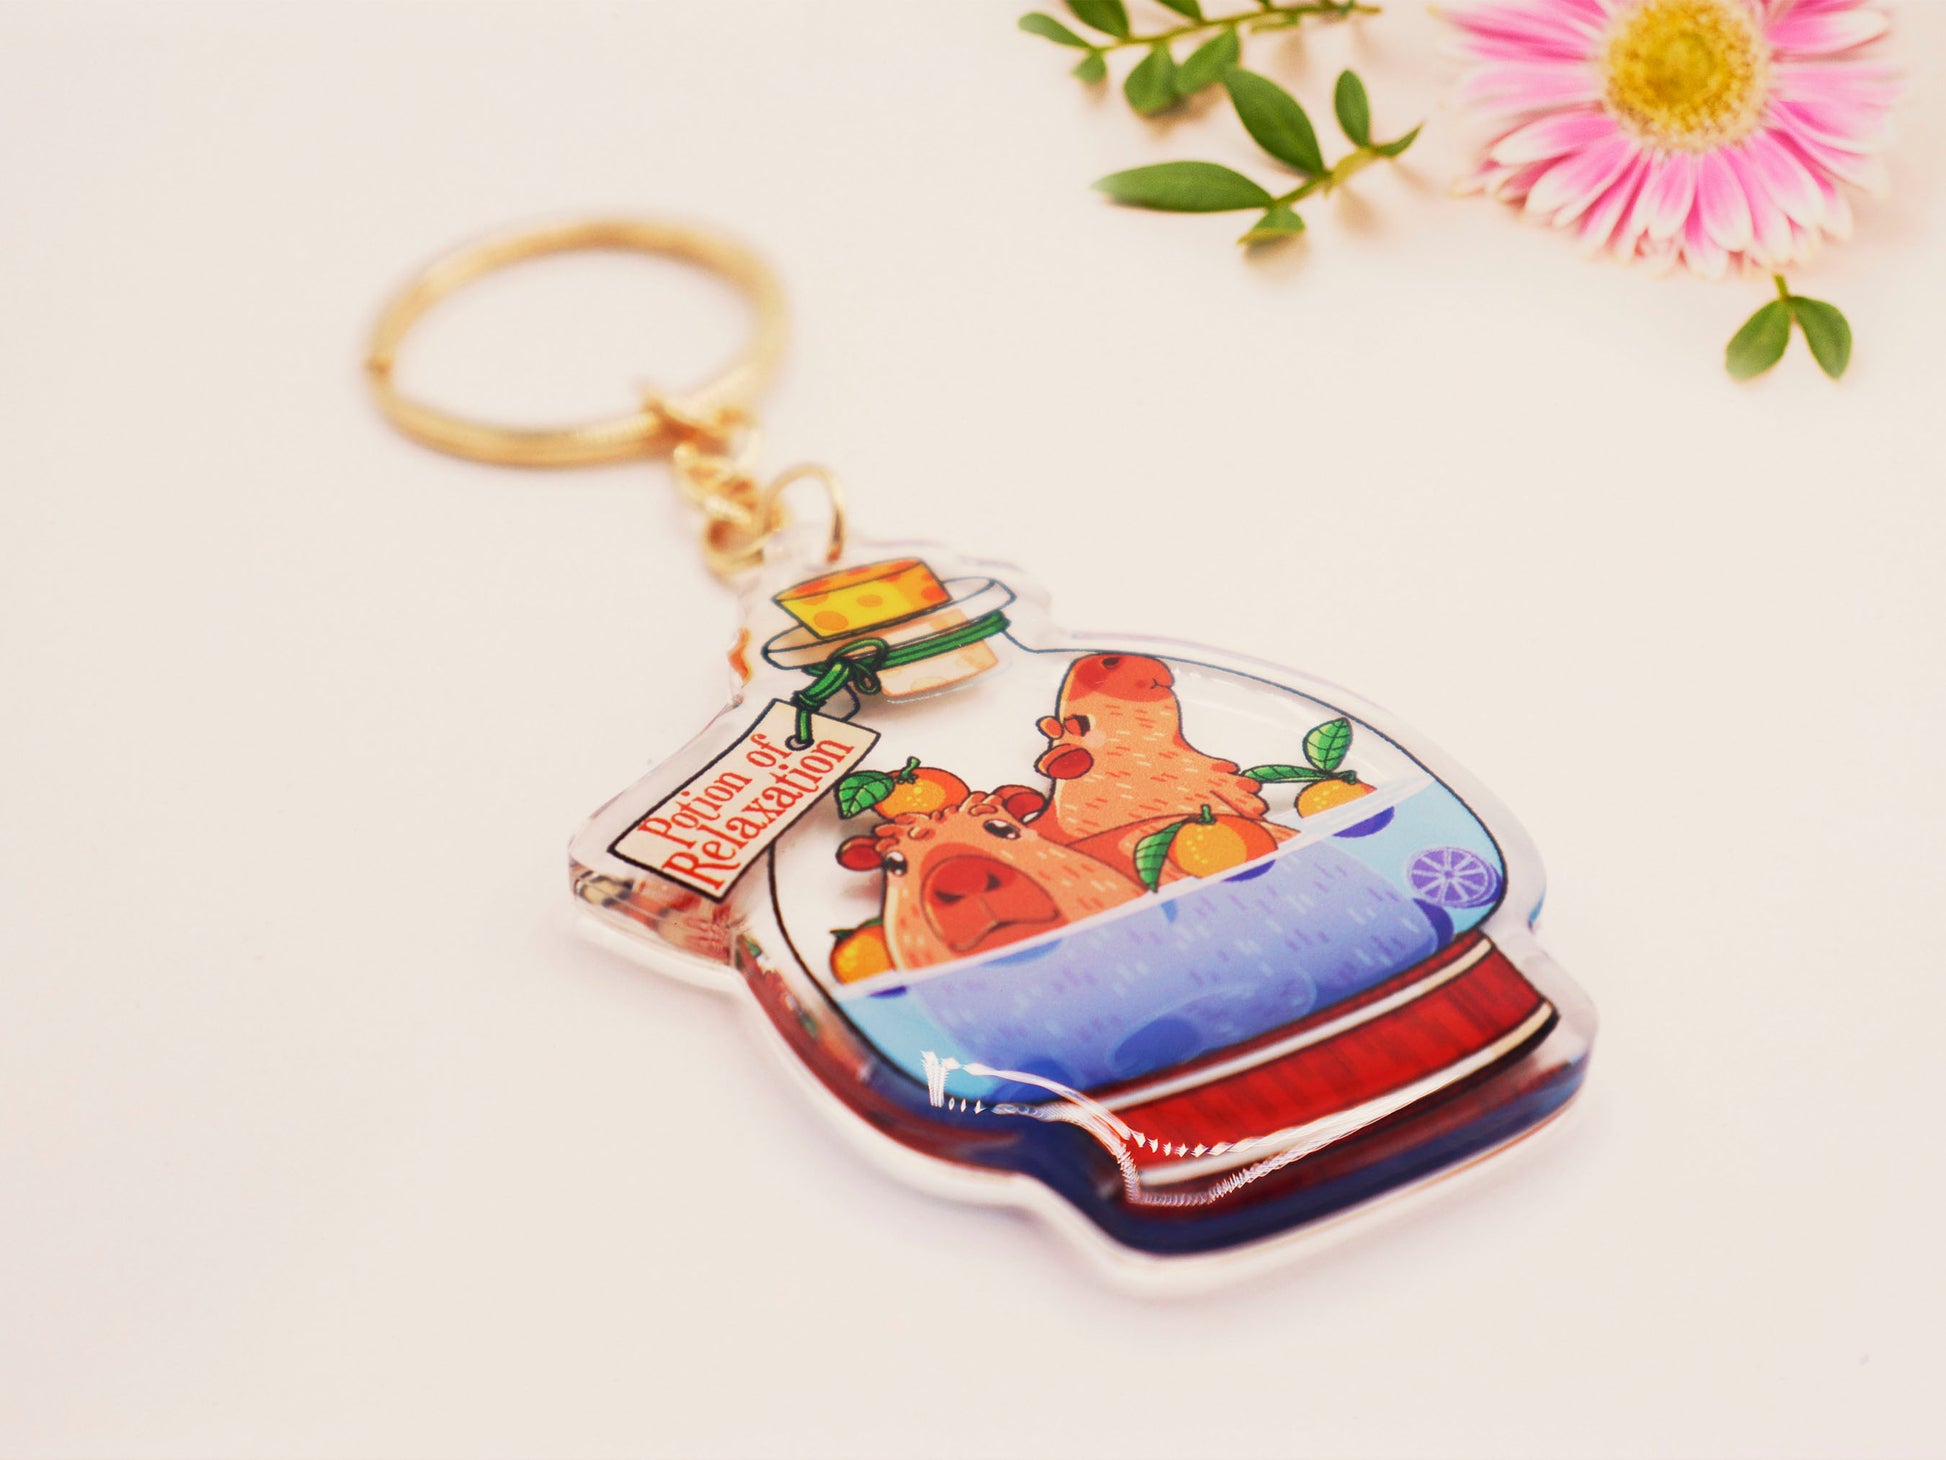 Double sided epoxy clear acrylic keychain with golden clasp of two happy capybaras sat inside an Onsen shaped potion bottle with yuzu oranges, with the potion bottle labelled Potion of Relaxation 